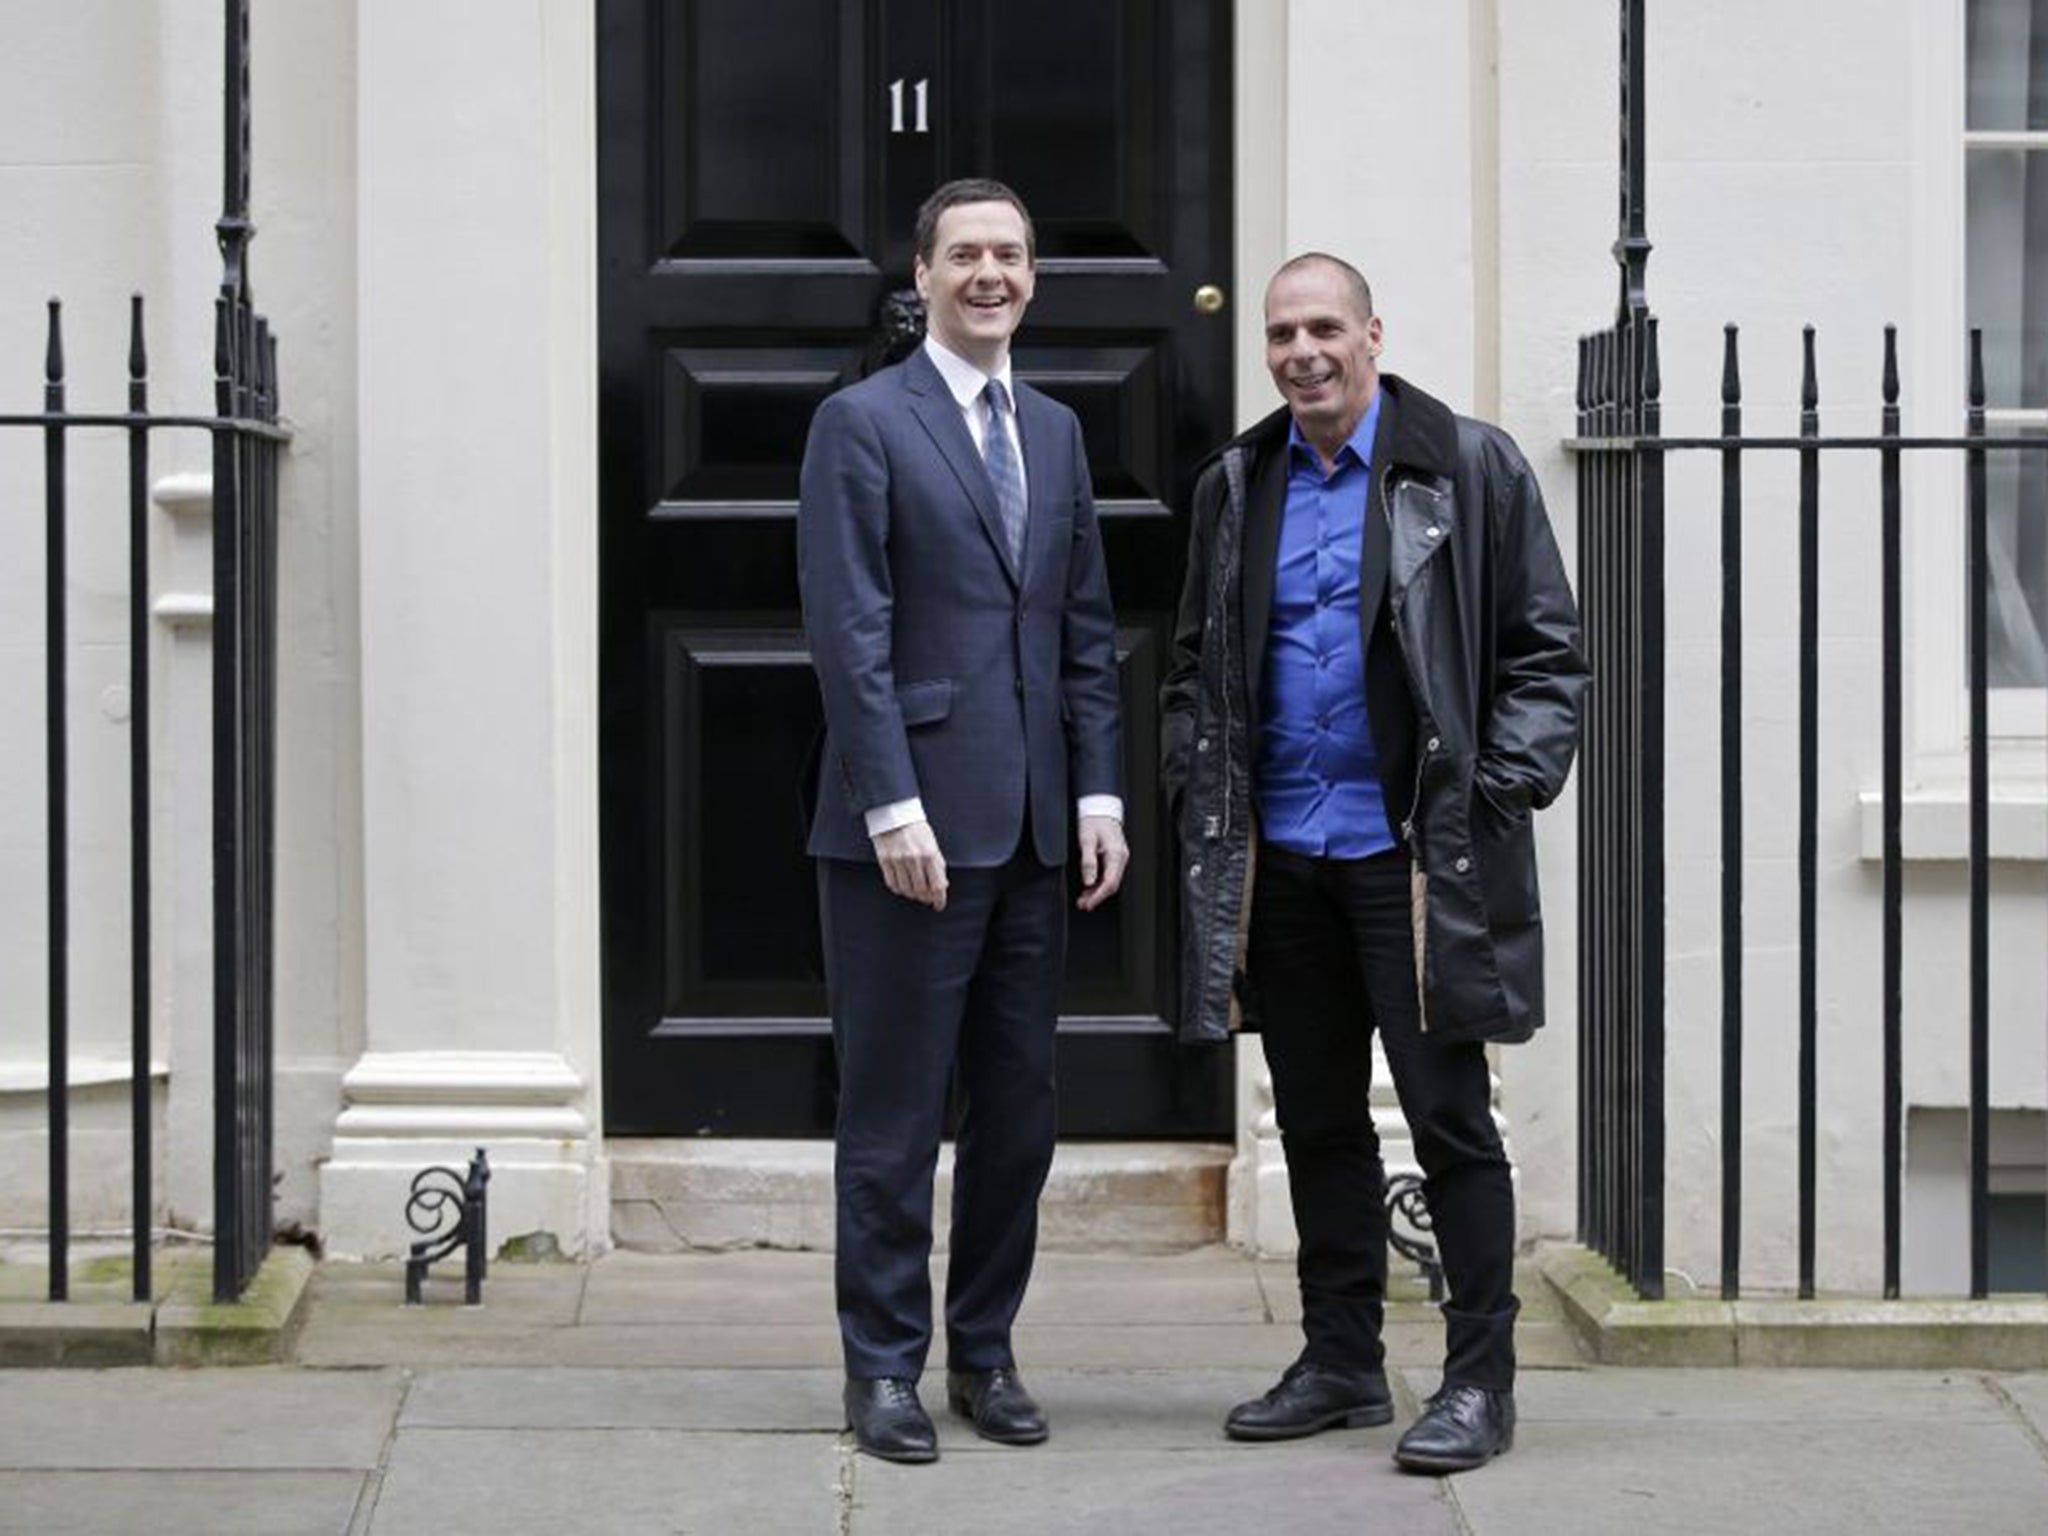 George Osborne with the Greek Finance Minister, Yanis Varoufakis, outside 11 Downing Street on Monday (Reuters)